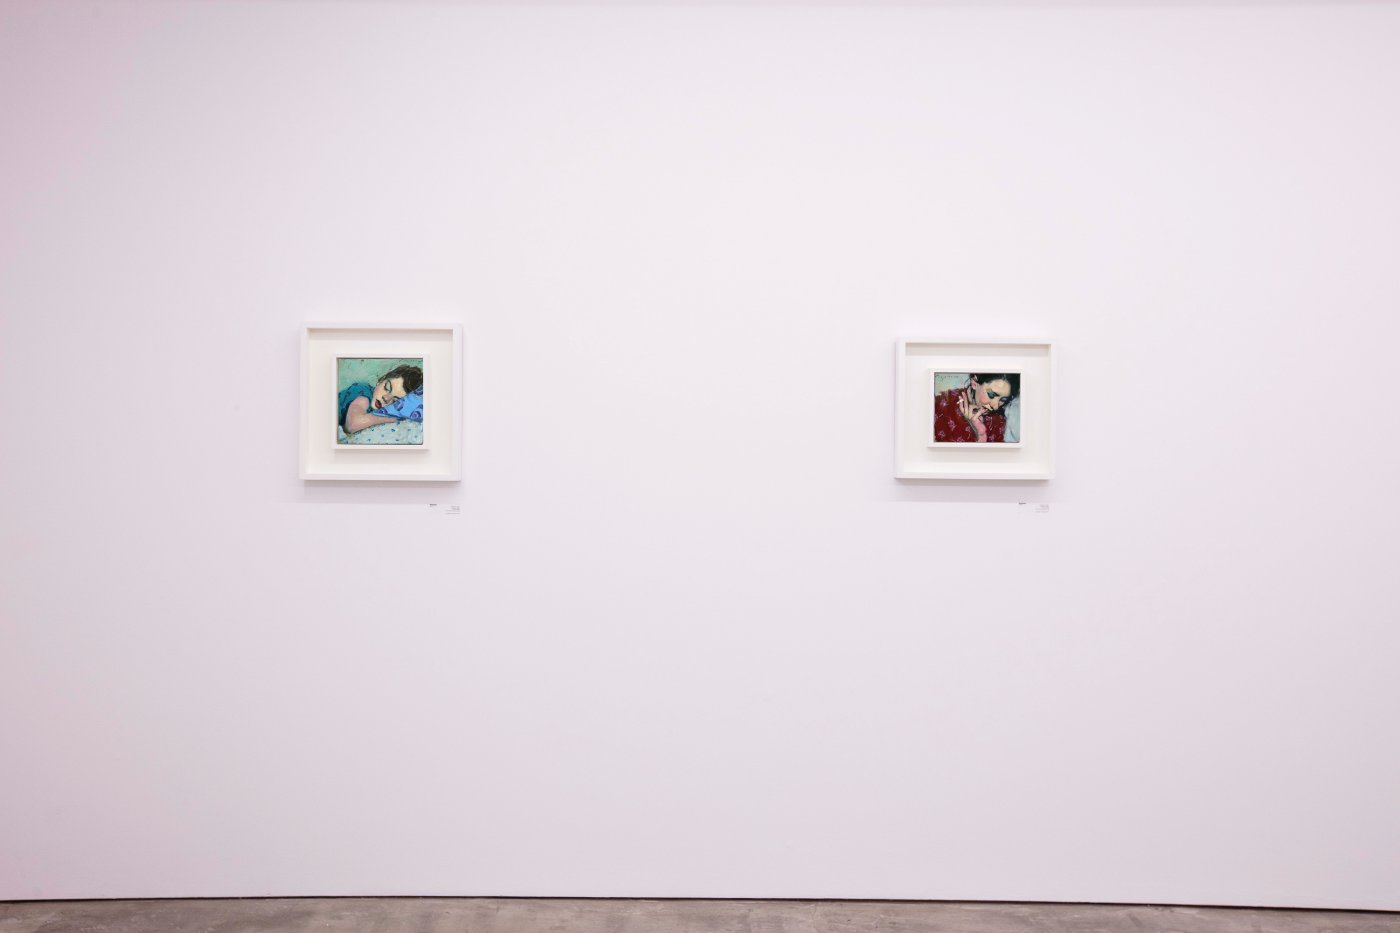 Installation image for Malcolm Liepke: Do You See Me?, at Pontone Gallery